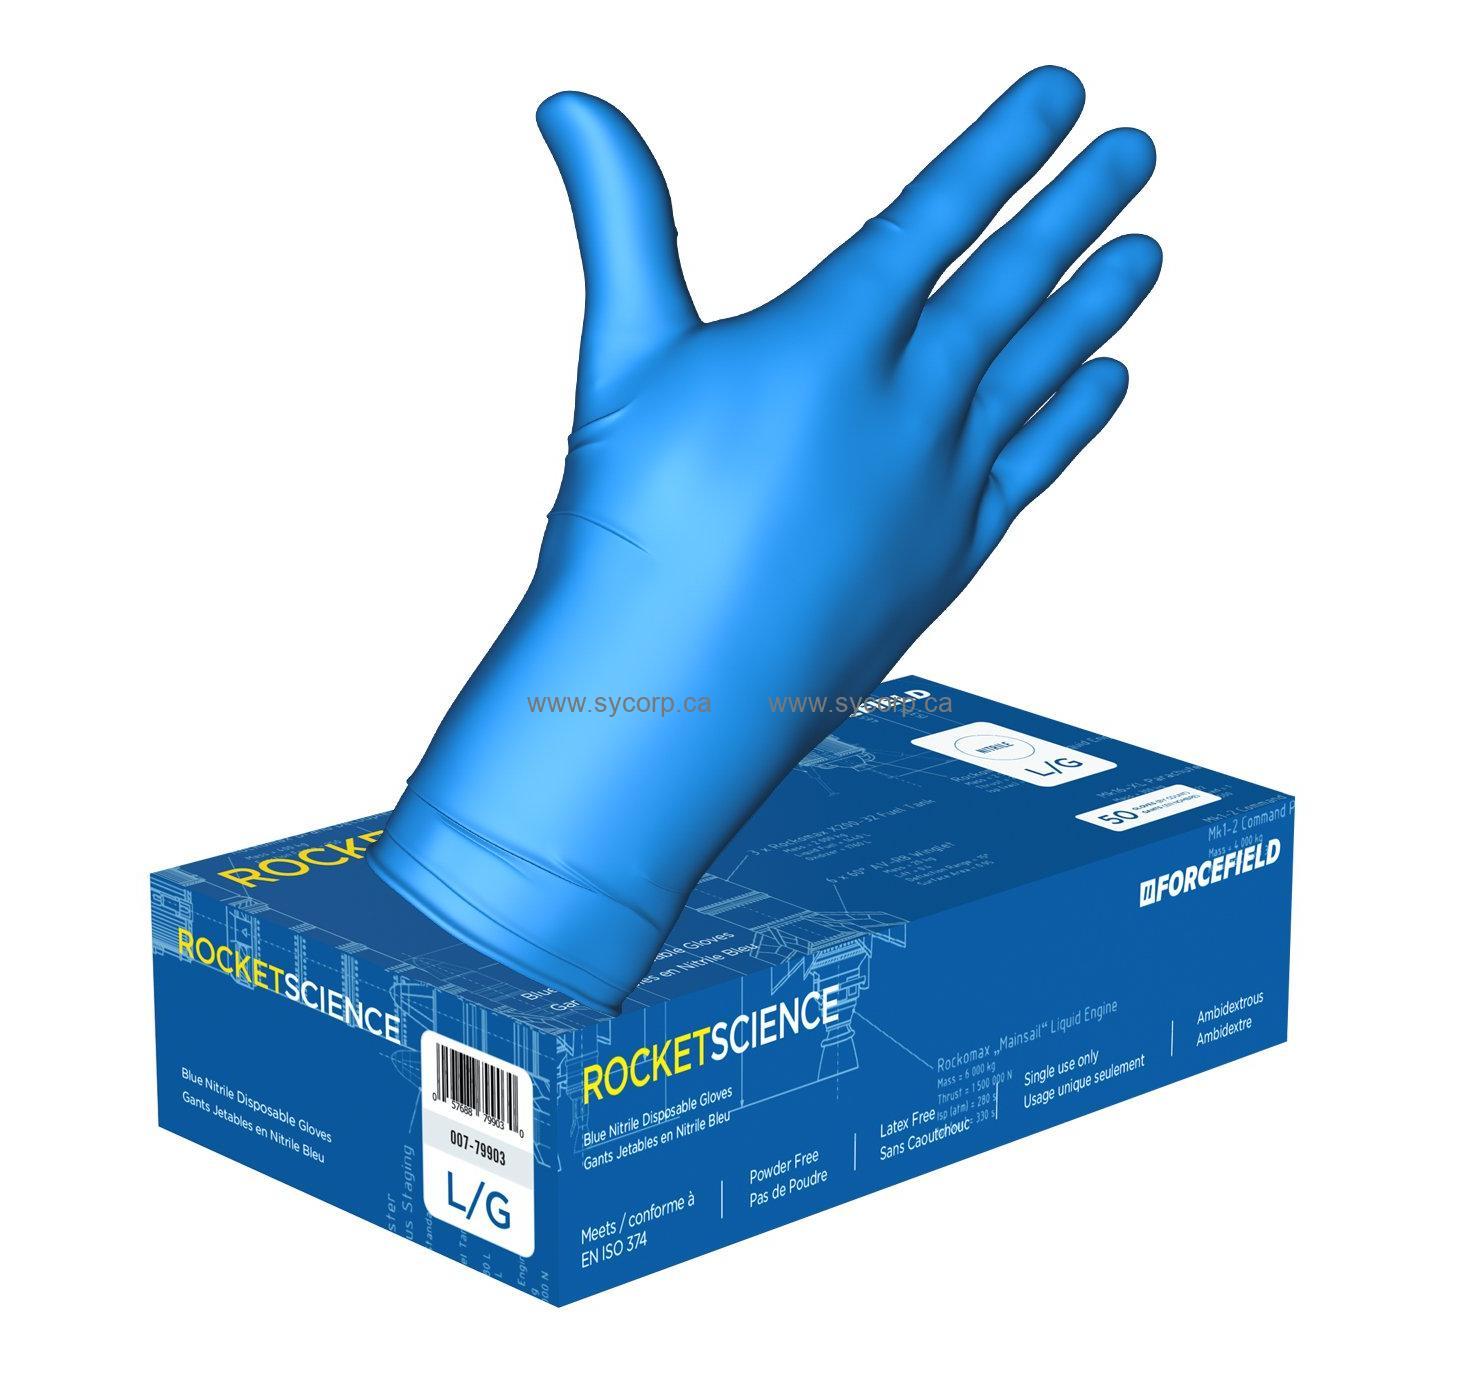 https://www.sycorp.ca/images/watermarked/1/thumbnails/1480/1400/detailed/6/007-79902_rocket_science_gloves_blue_u3oq-ae.jpg